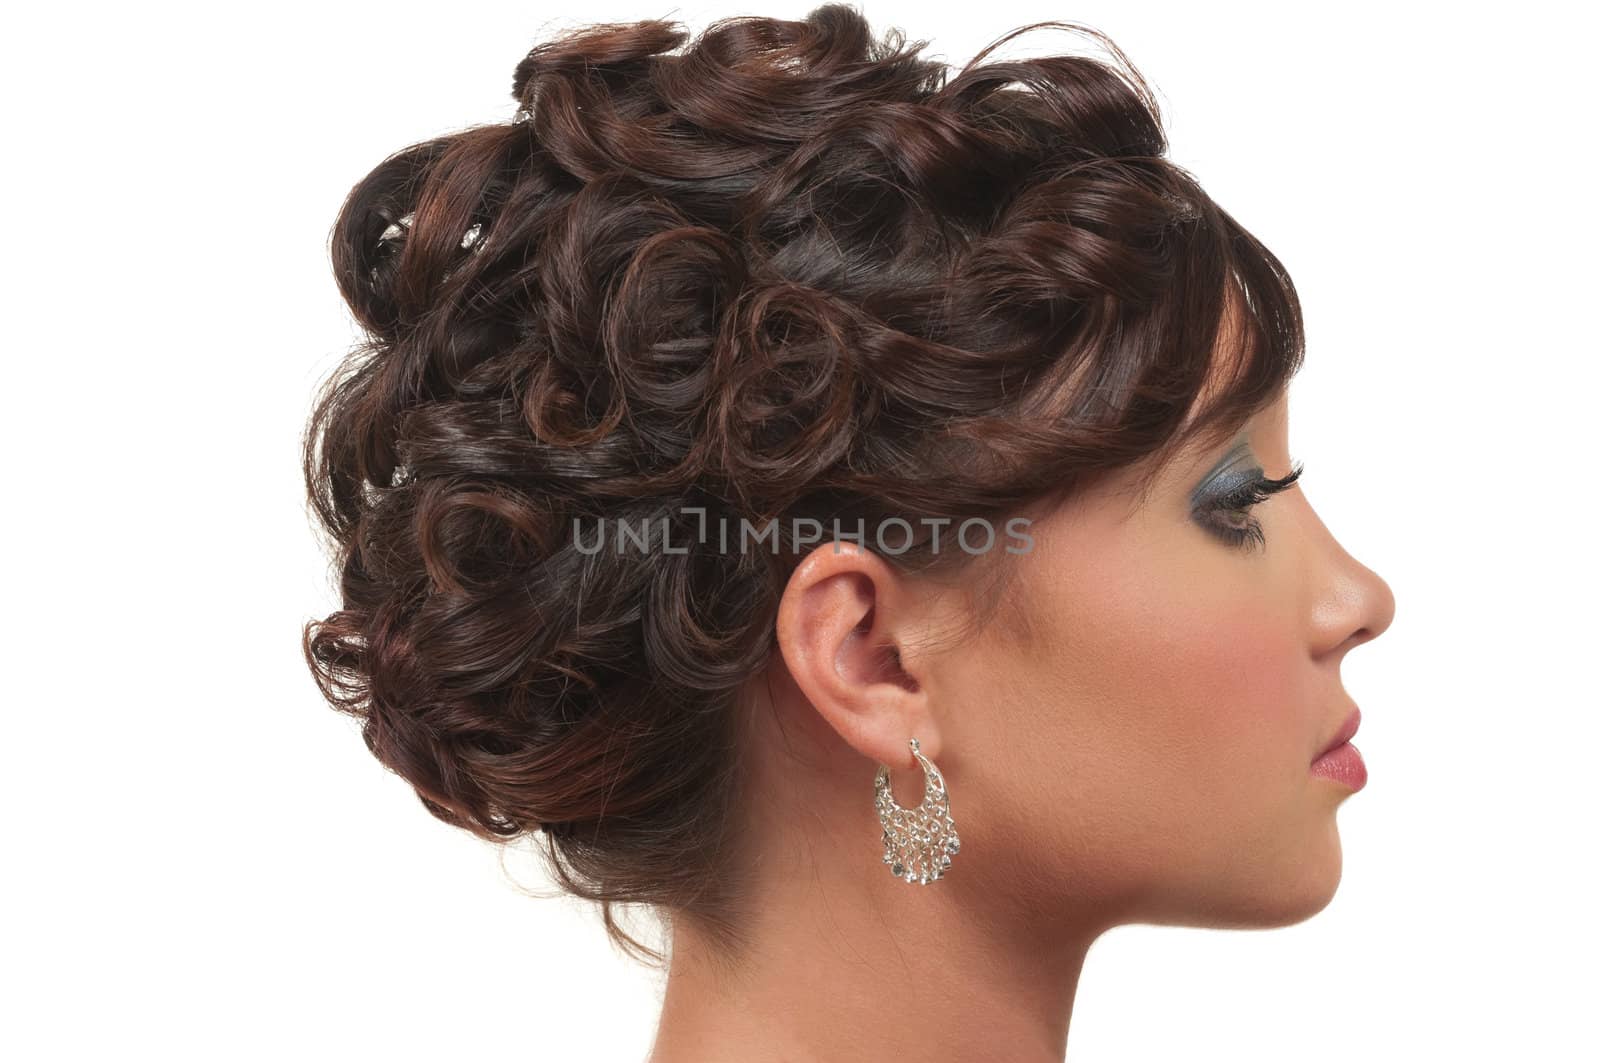 Hair and make up for prom, wedding or party